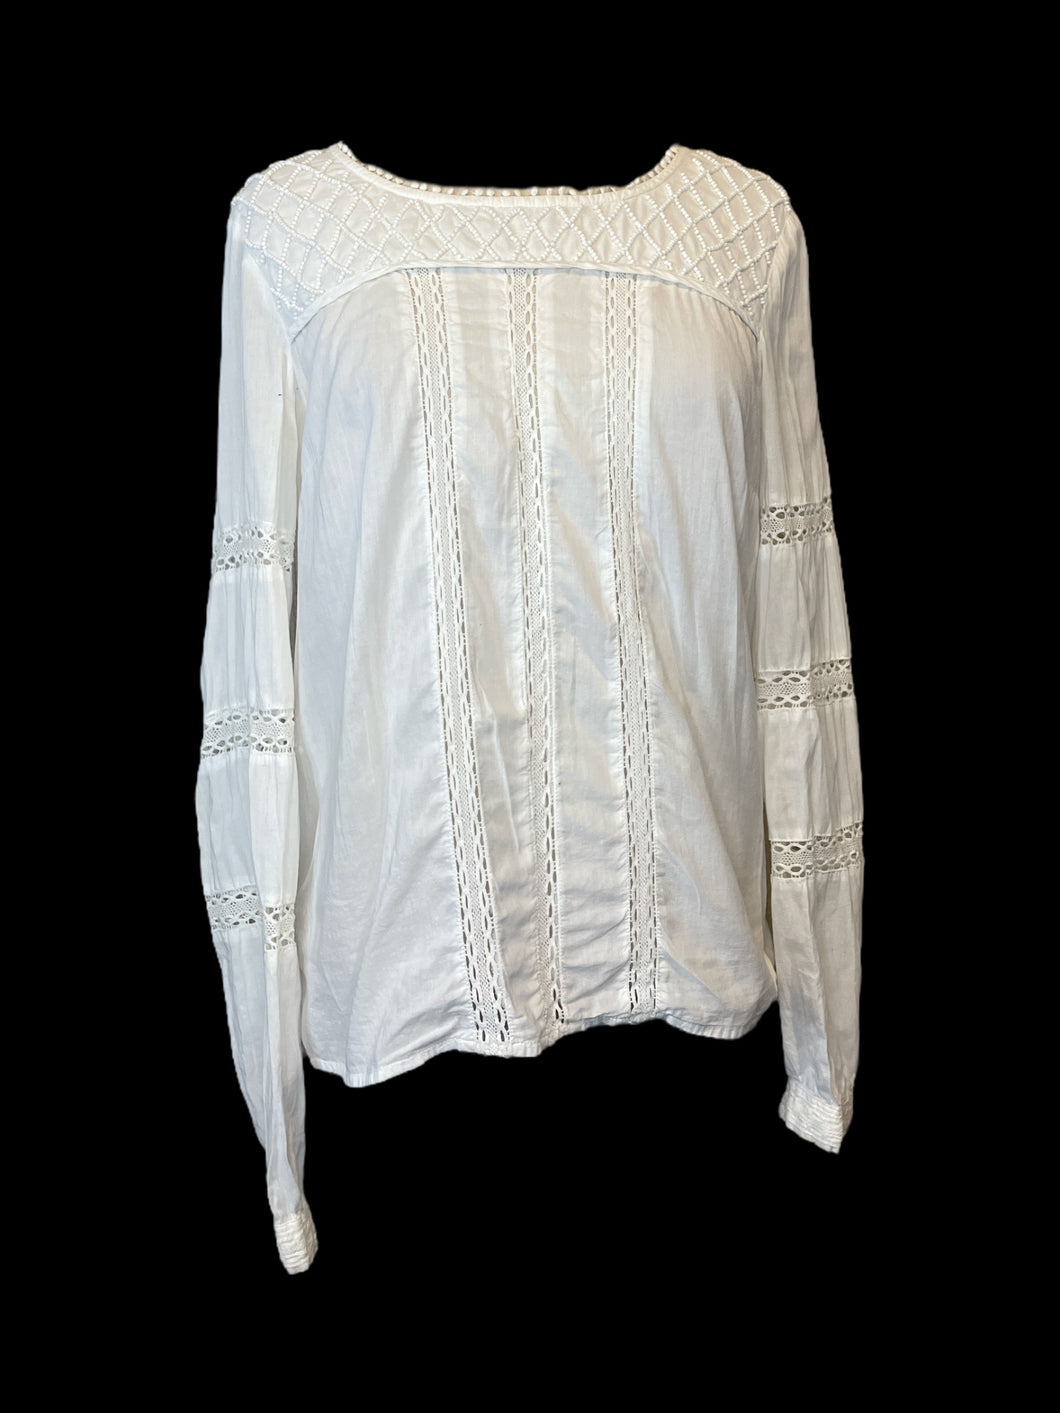 0X White long balloon sleeve scoop neck hi-lo top w/ beading detail, lace cutouts, & button cuffs